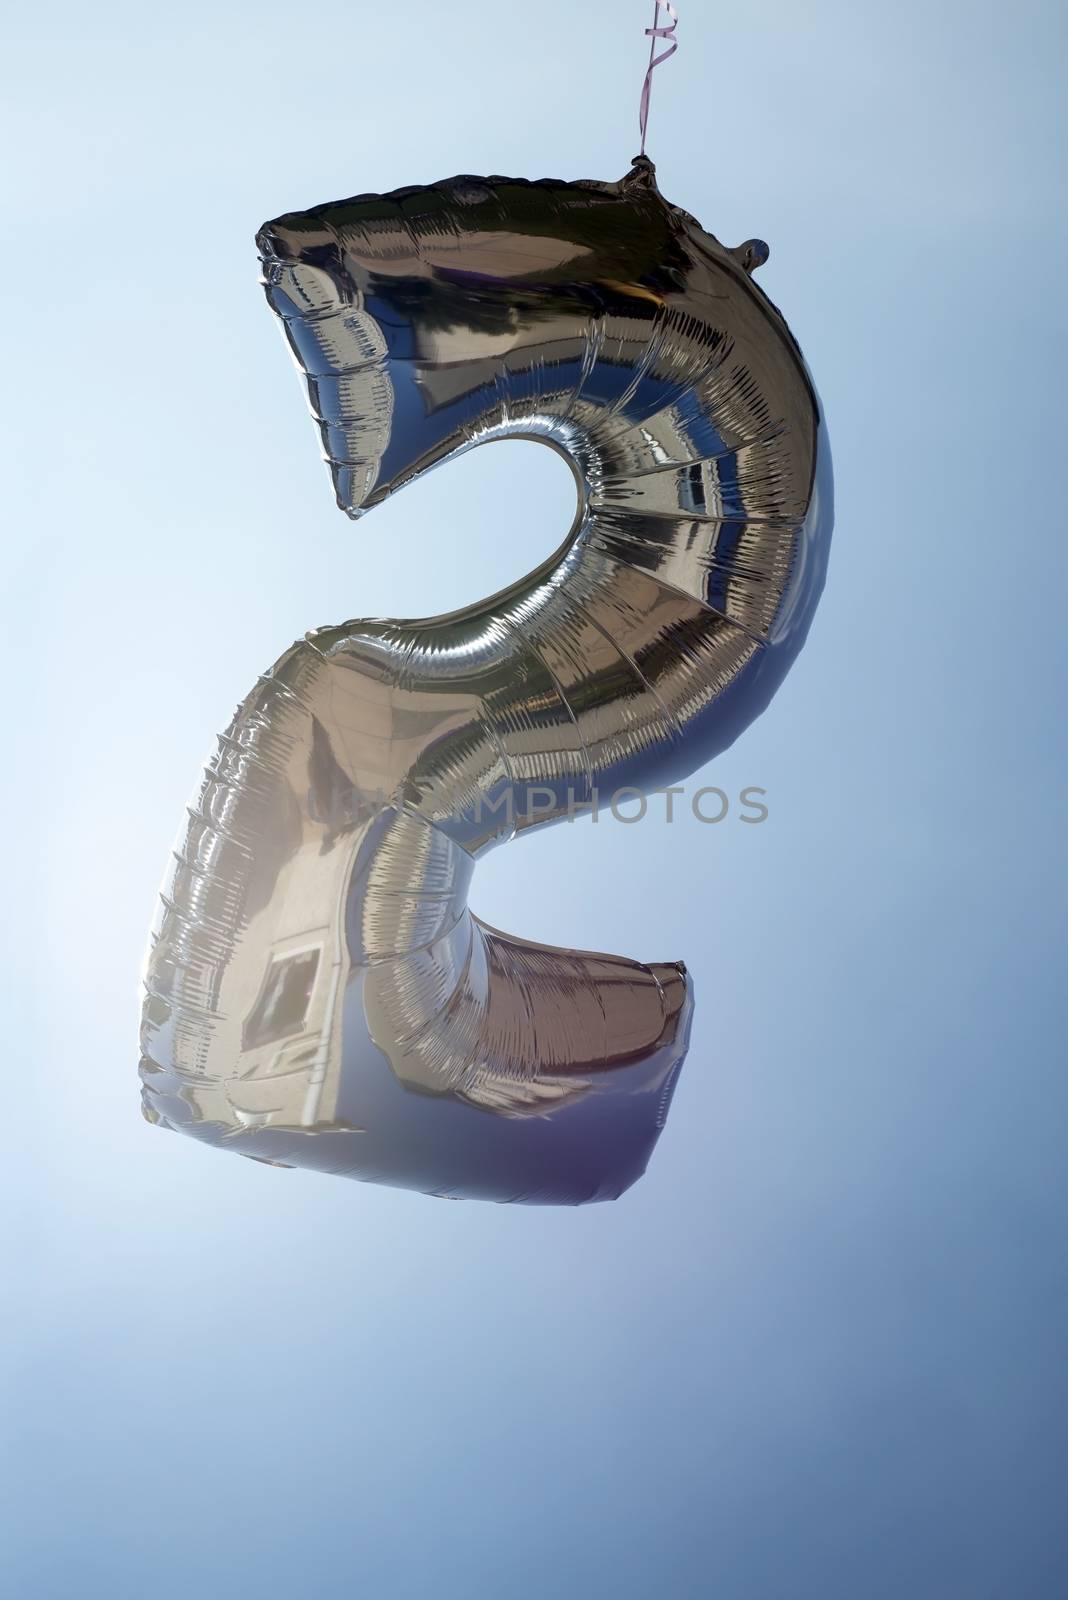 number 2 helium filled balloon against a blue sky